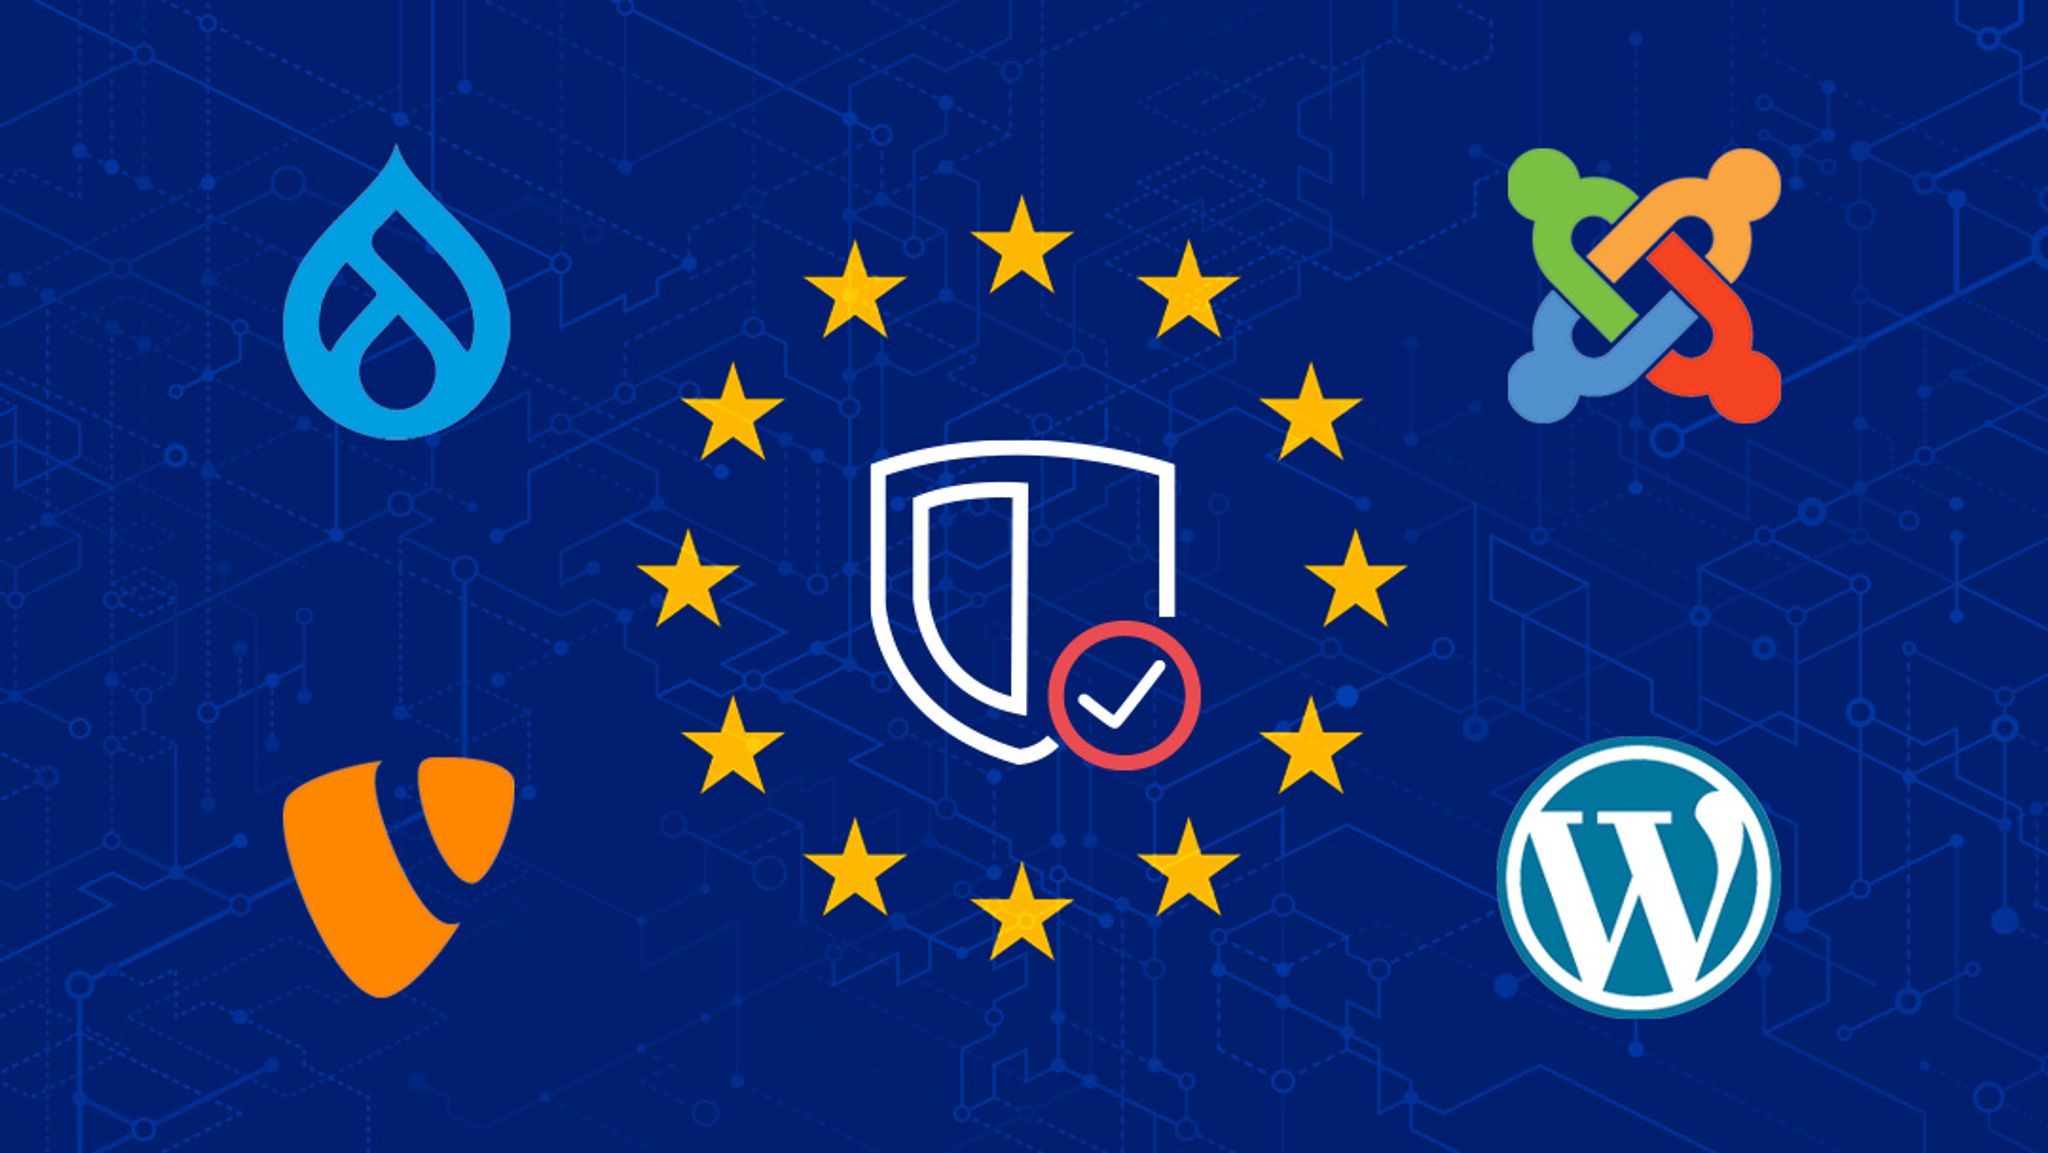 Collection of open source logo icons for Drupal, Joomla, TYPO3, and WordPress, all surrounding a circle of yellow stars that represent the flag of the EU. In the center of the star circle is a graphic icon of a shield and a checkmark, representing the Cybersecurity Resilience Act (CRA).